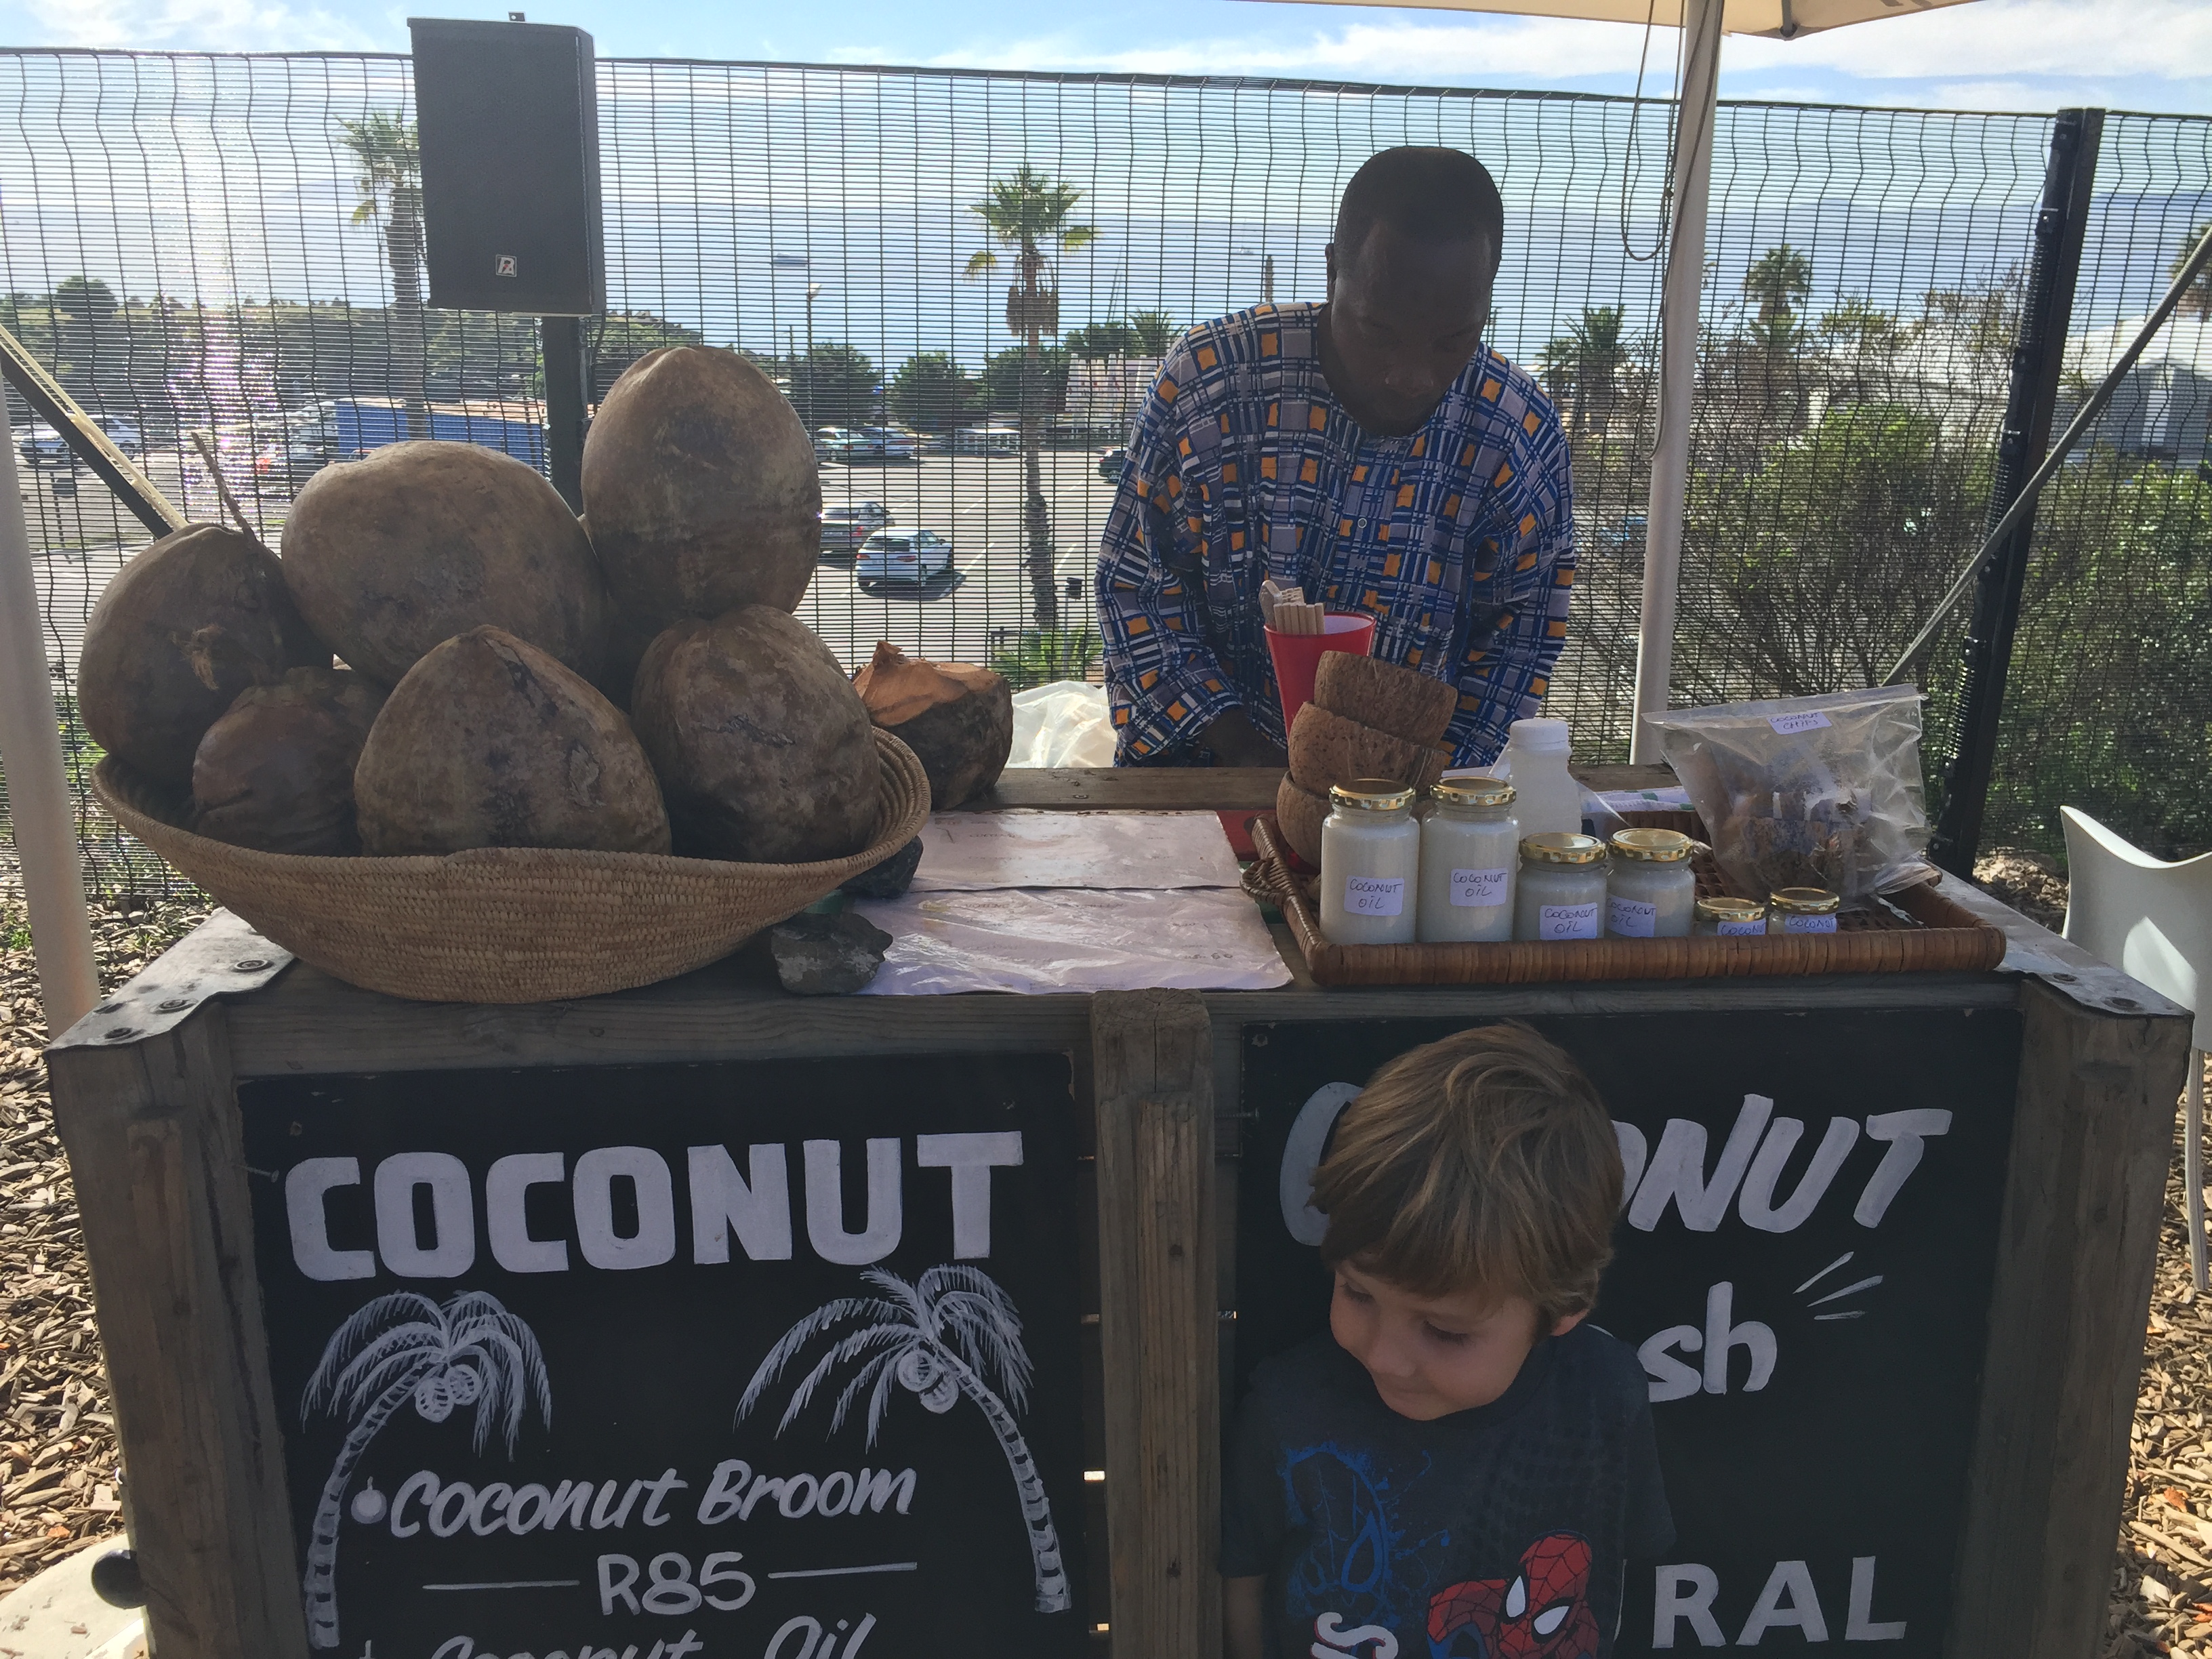 Basil the coconut man at the Granger Bay Market, Cape Town, South Africa - Copyright Great Health Naturally